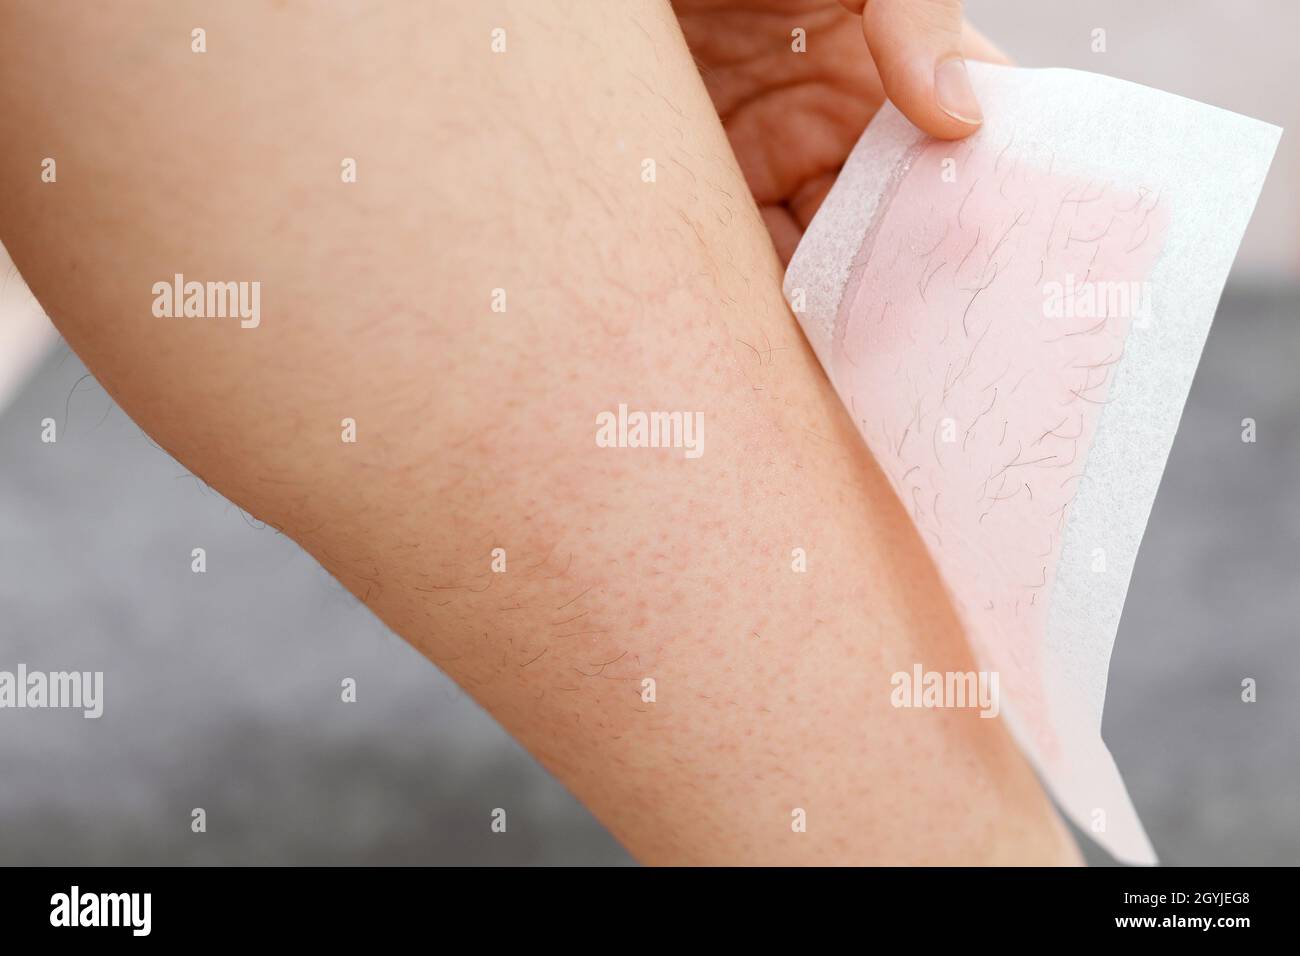 Hairy legs. Woman using beeswax stripe to shave her leg. Depilation procedure with wax, close up. Hair removal concept. Stock Photo